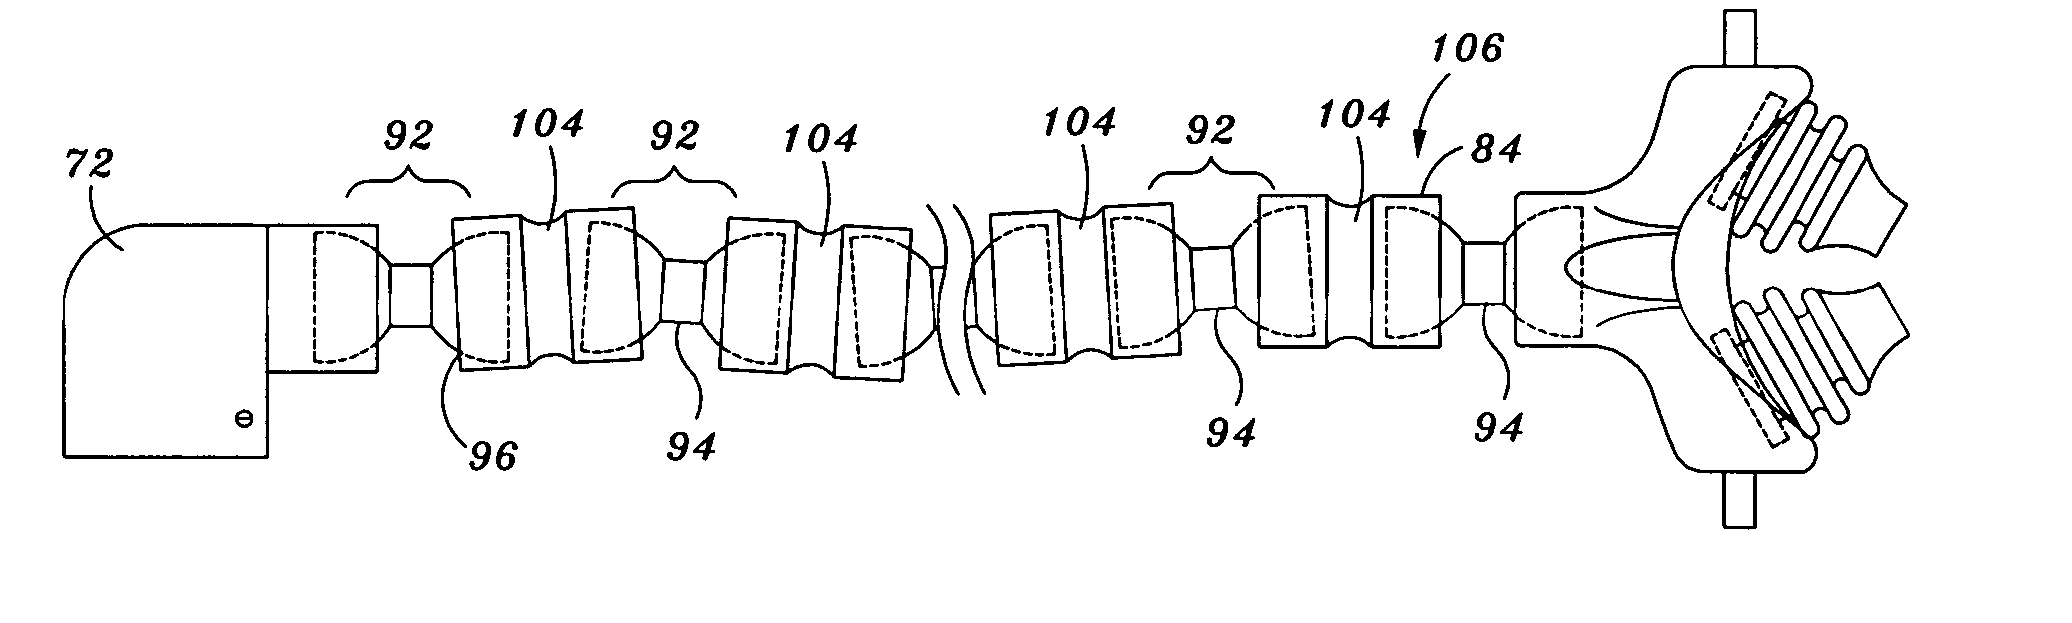 User interface and head gear for a continuous positive airway pressure device